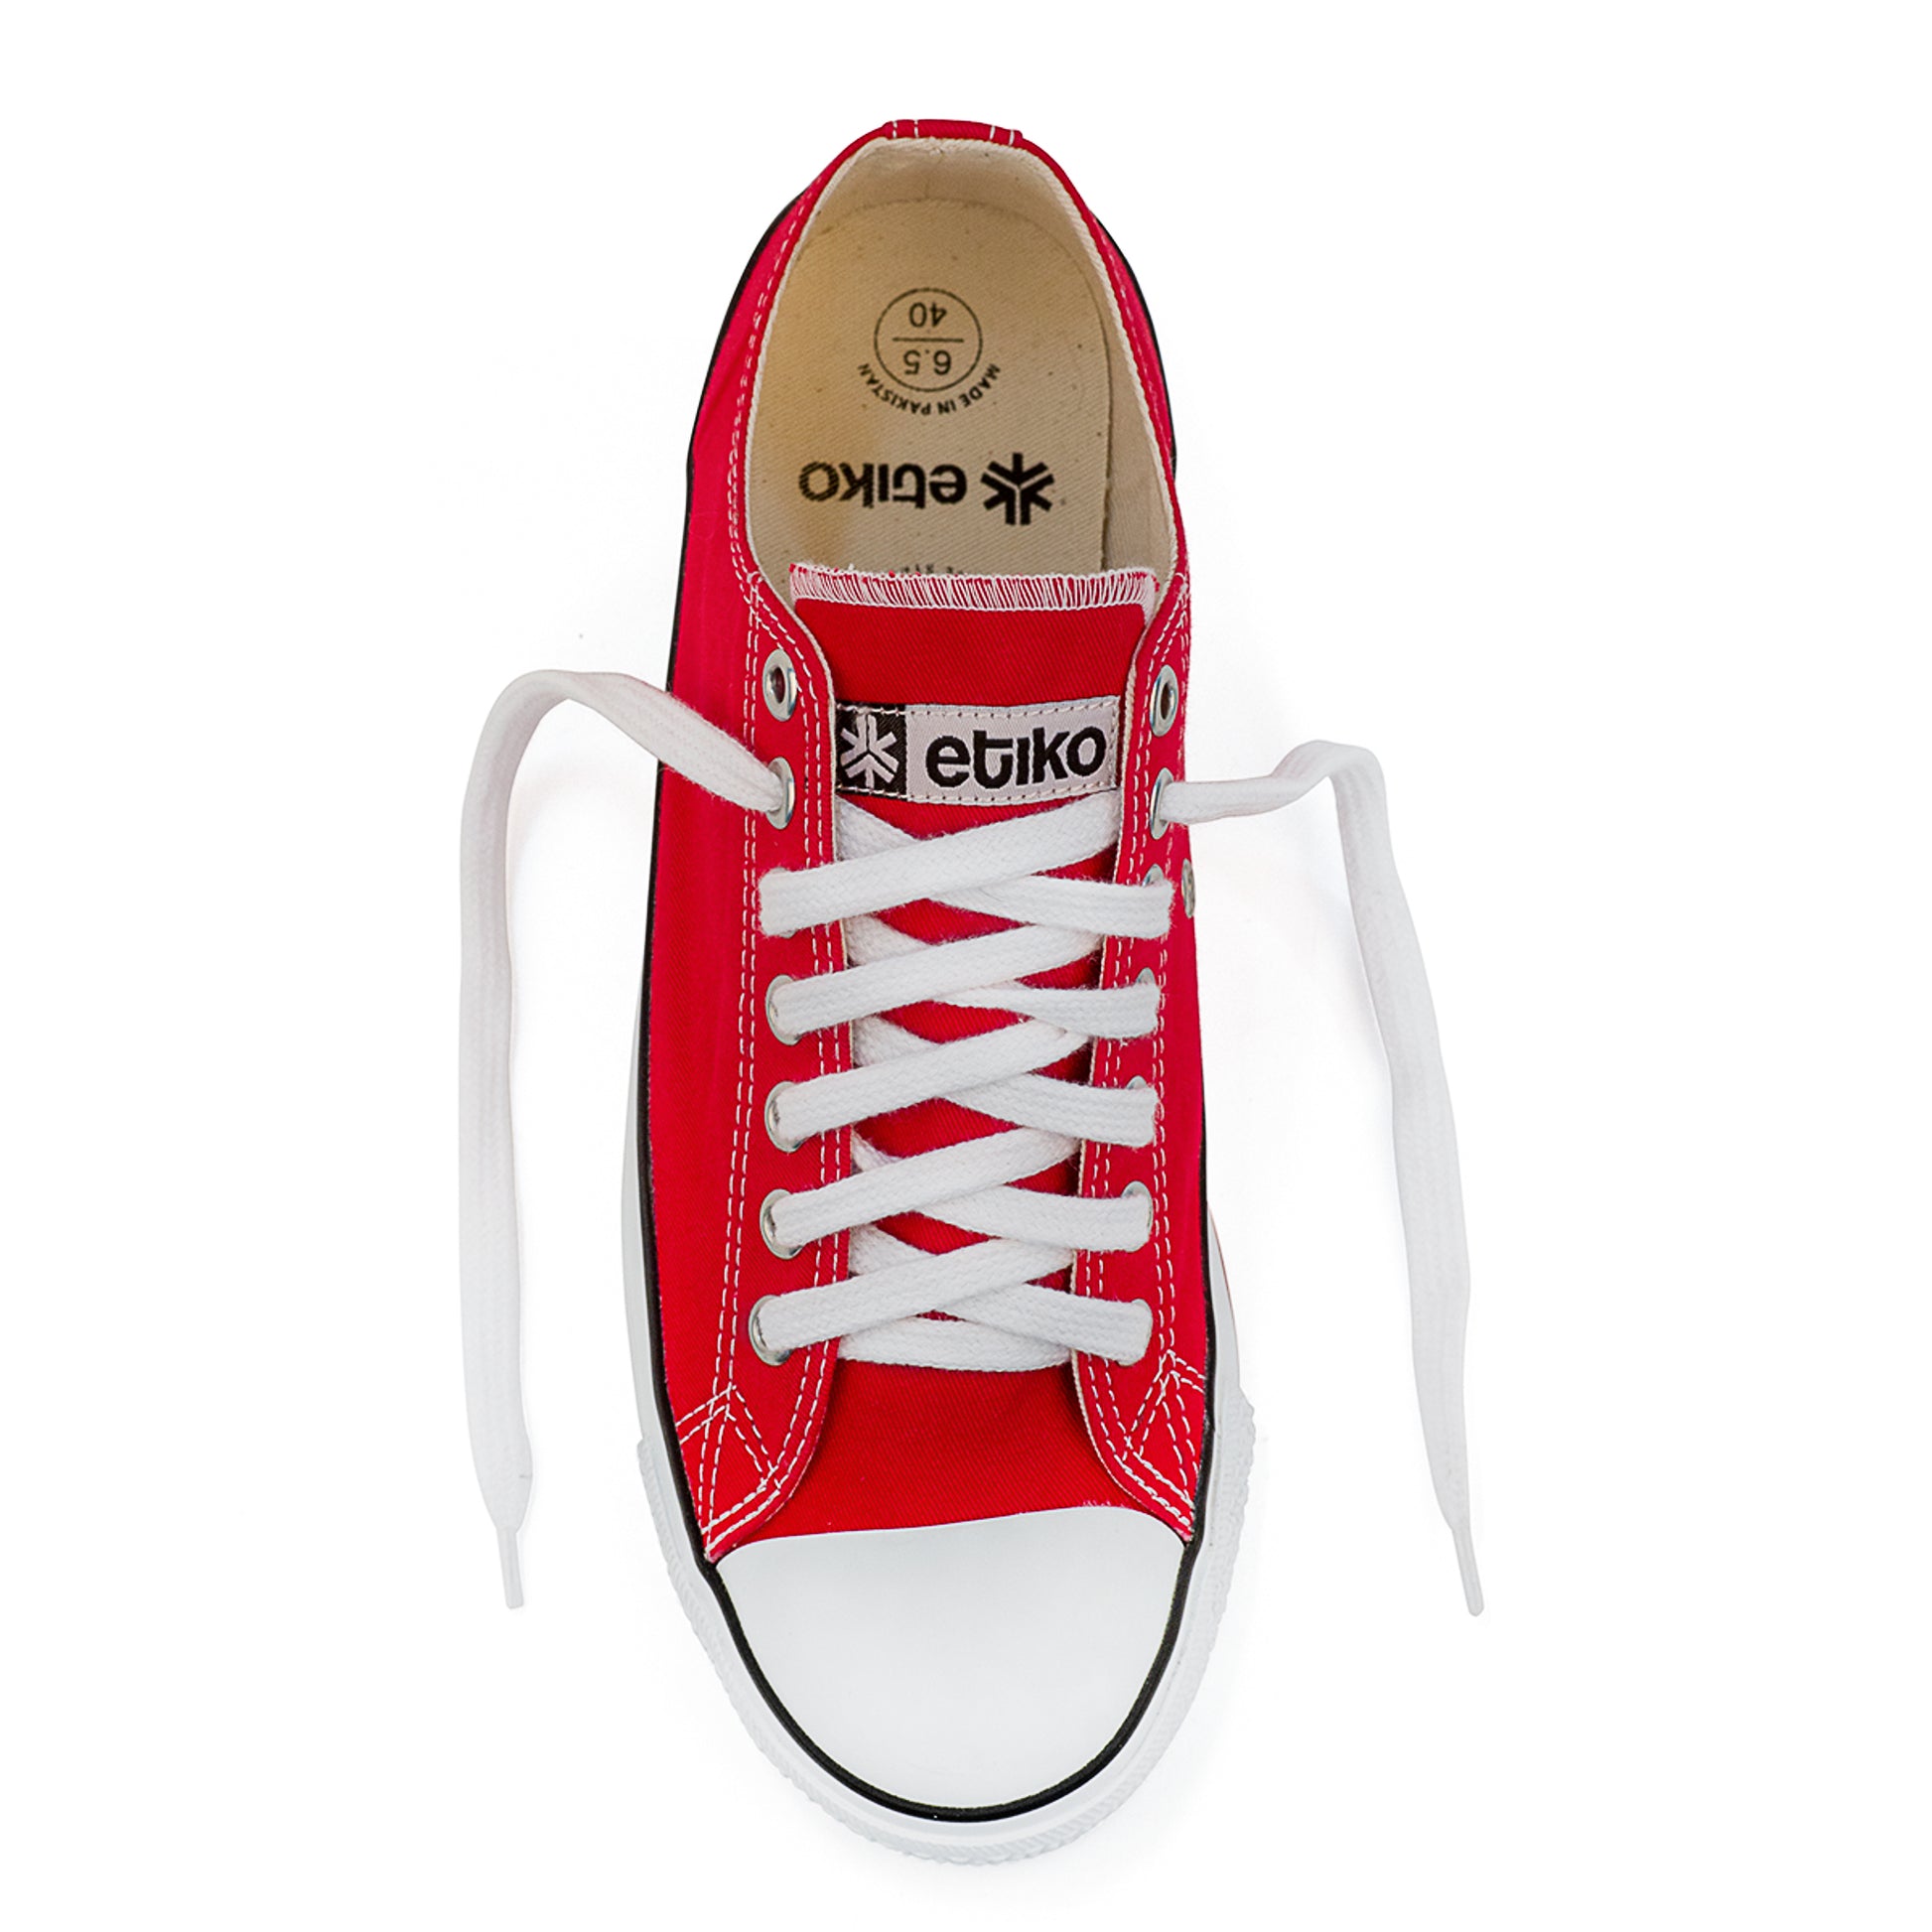 Etiko Vegan Low Cut Red and White Sneakers Organic and Fairtrade Certified Ethical Sneakers